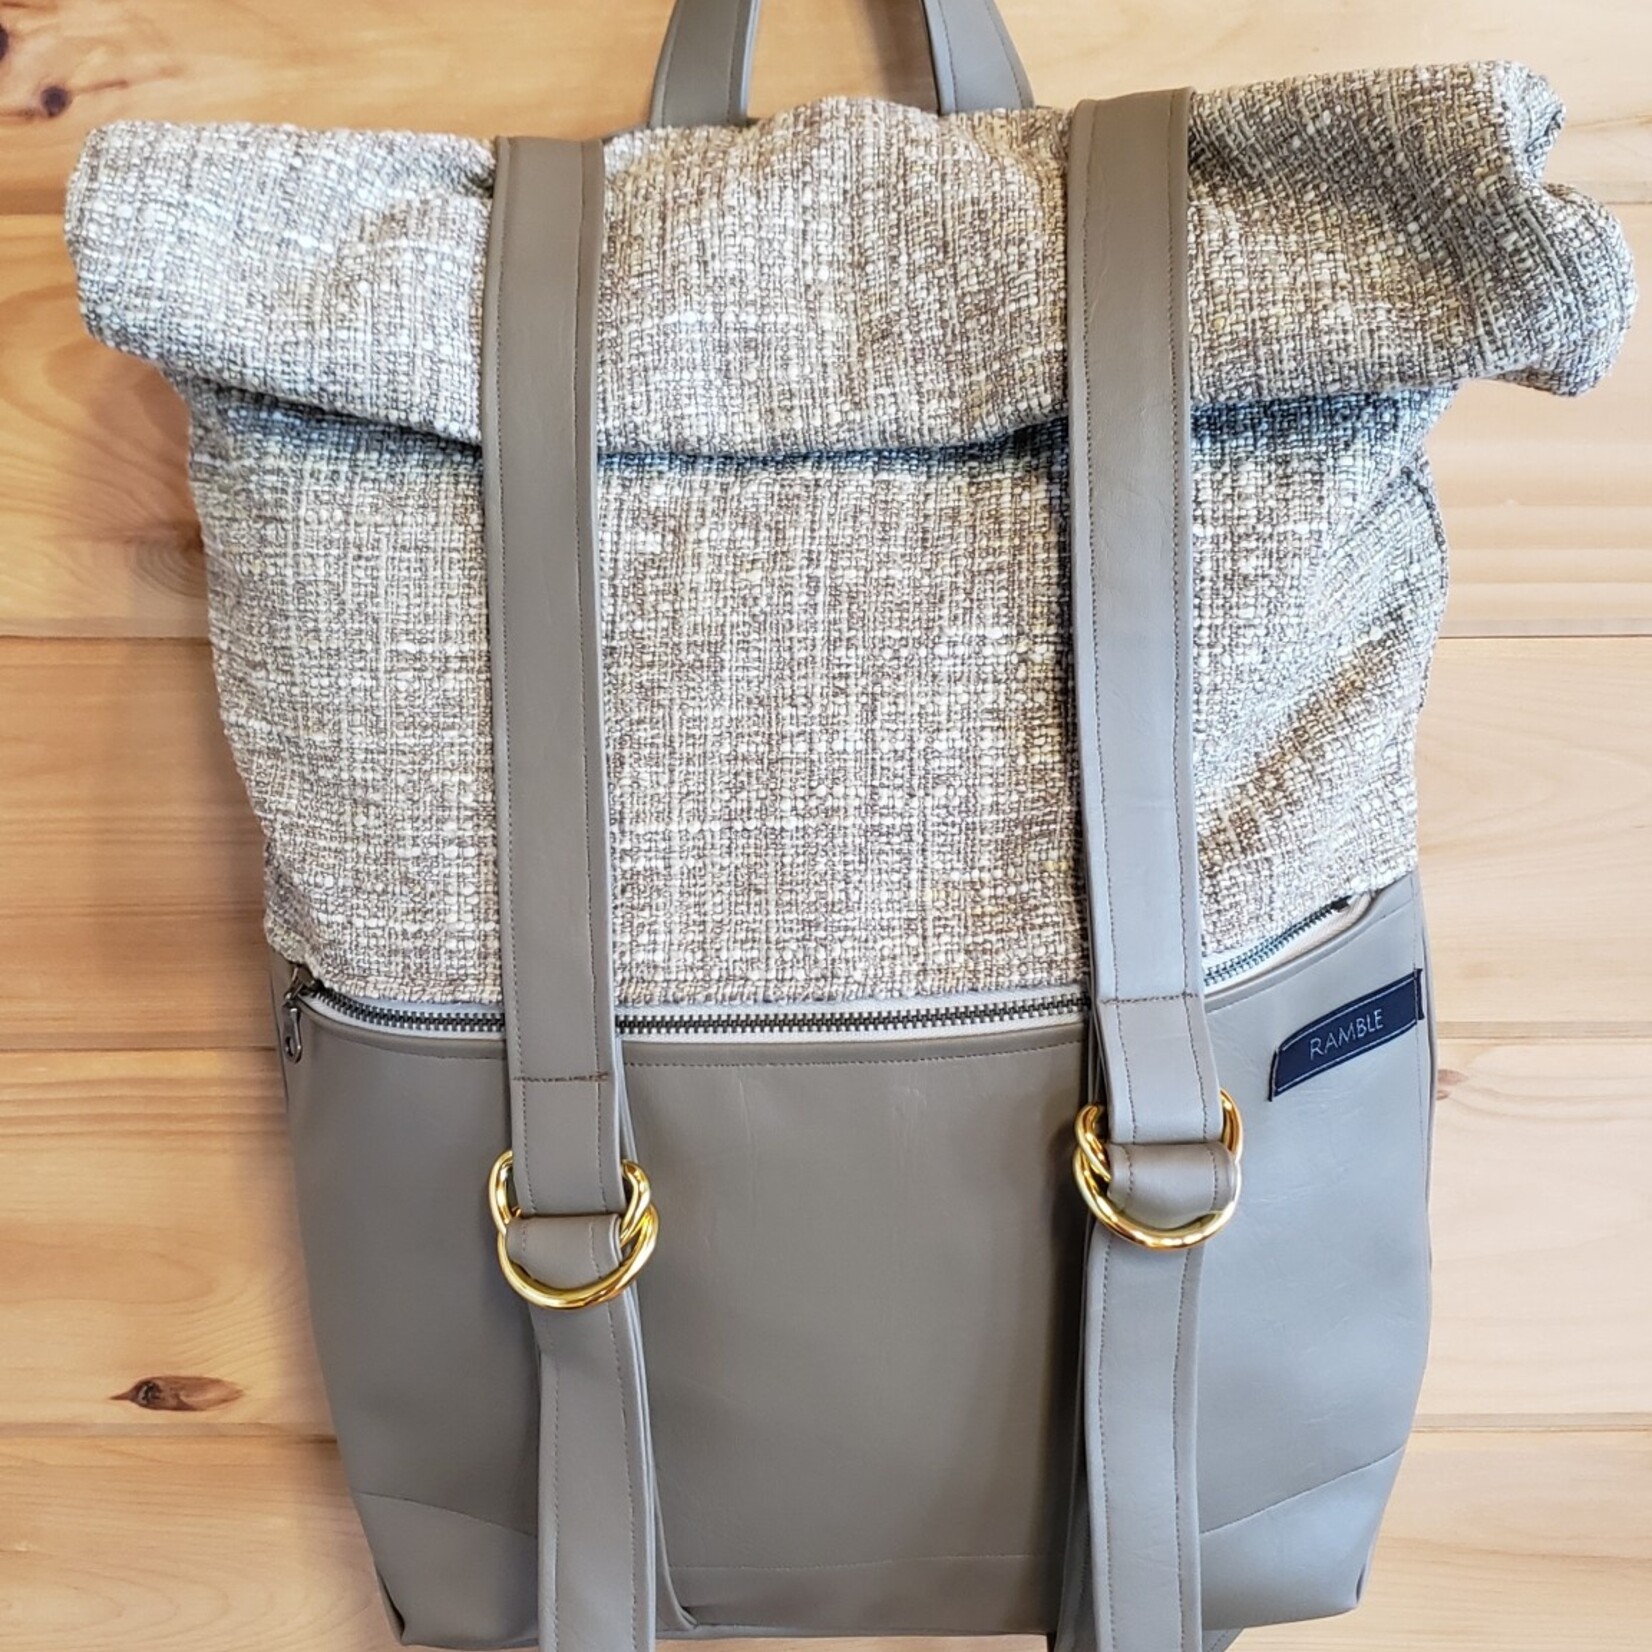 Ramble Rucksack - Neutral Toned Cream and Light Brown Rucksack Lined in Sand, Tan Vinyl, Brass Accents